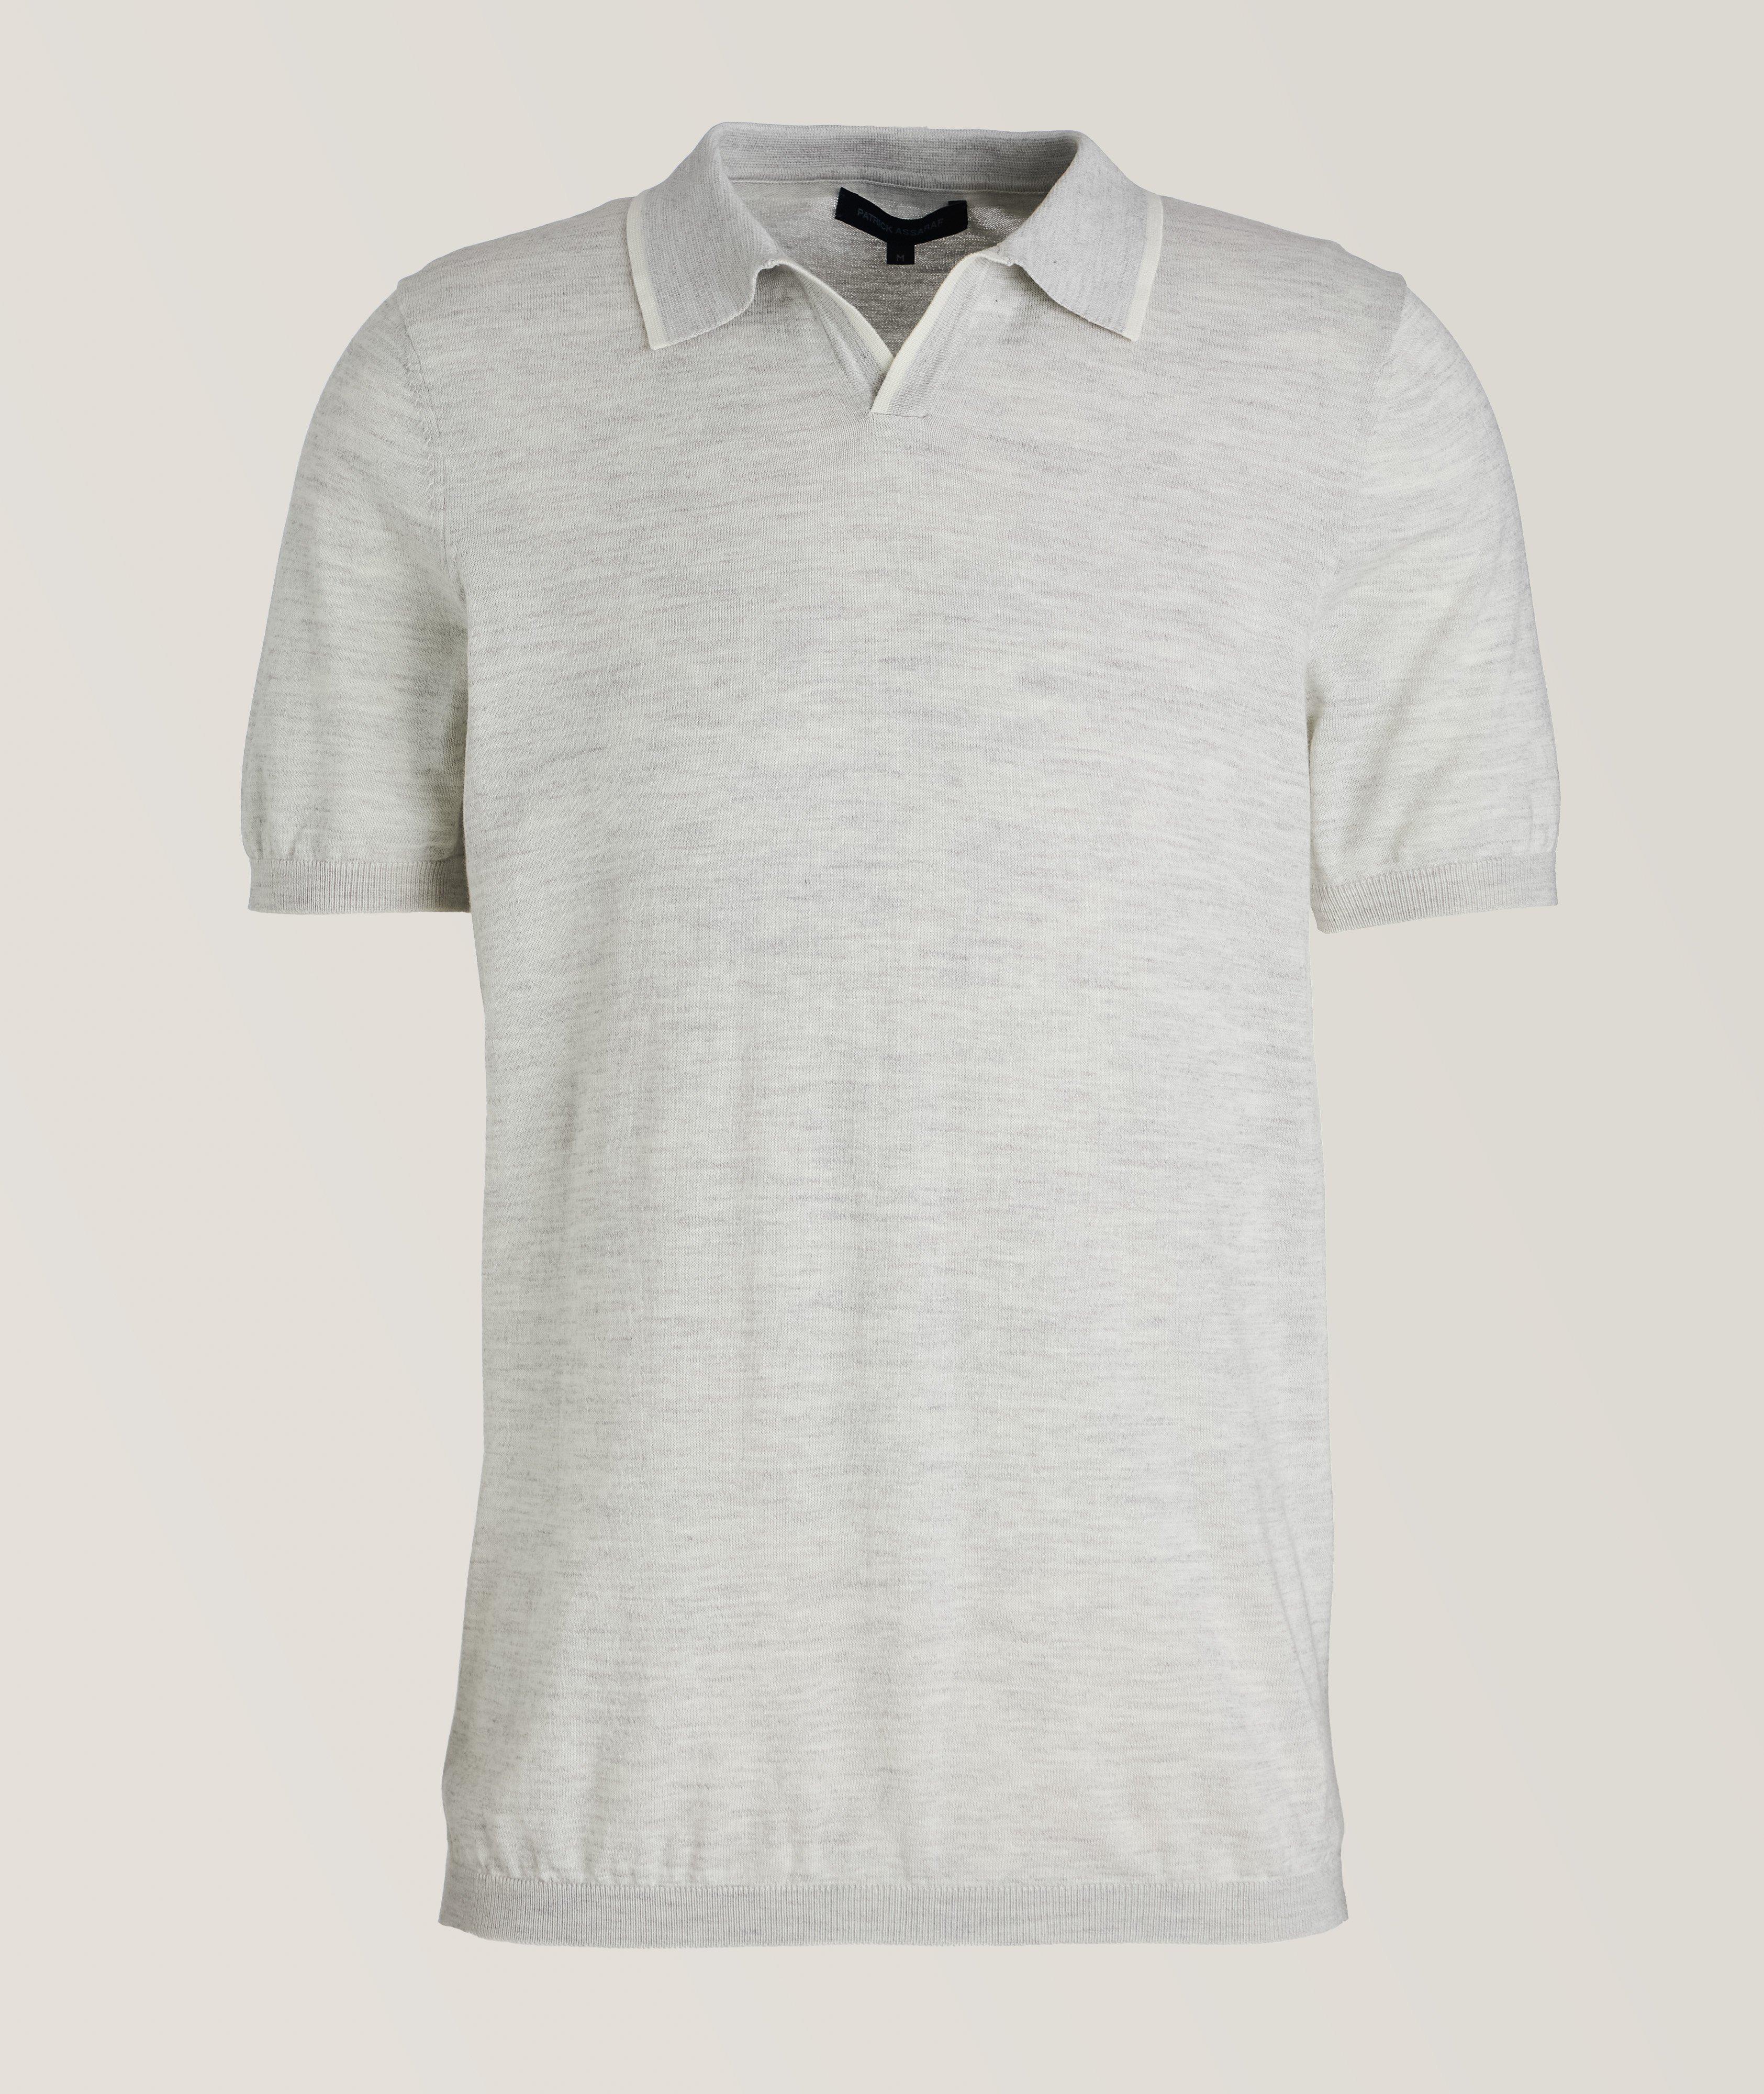 Contrast Piped Cotton-Blend Knit Polo image 0